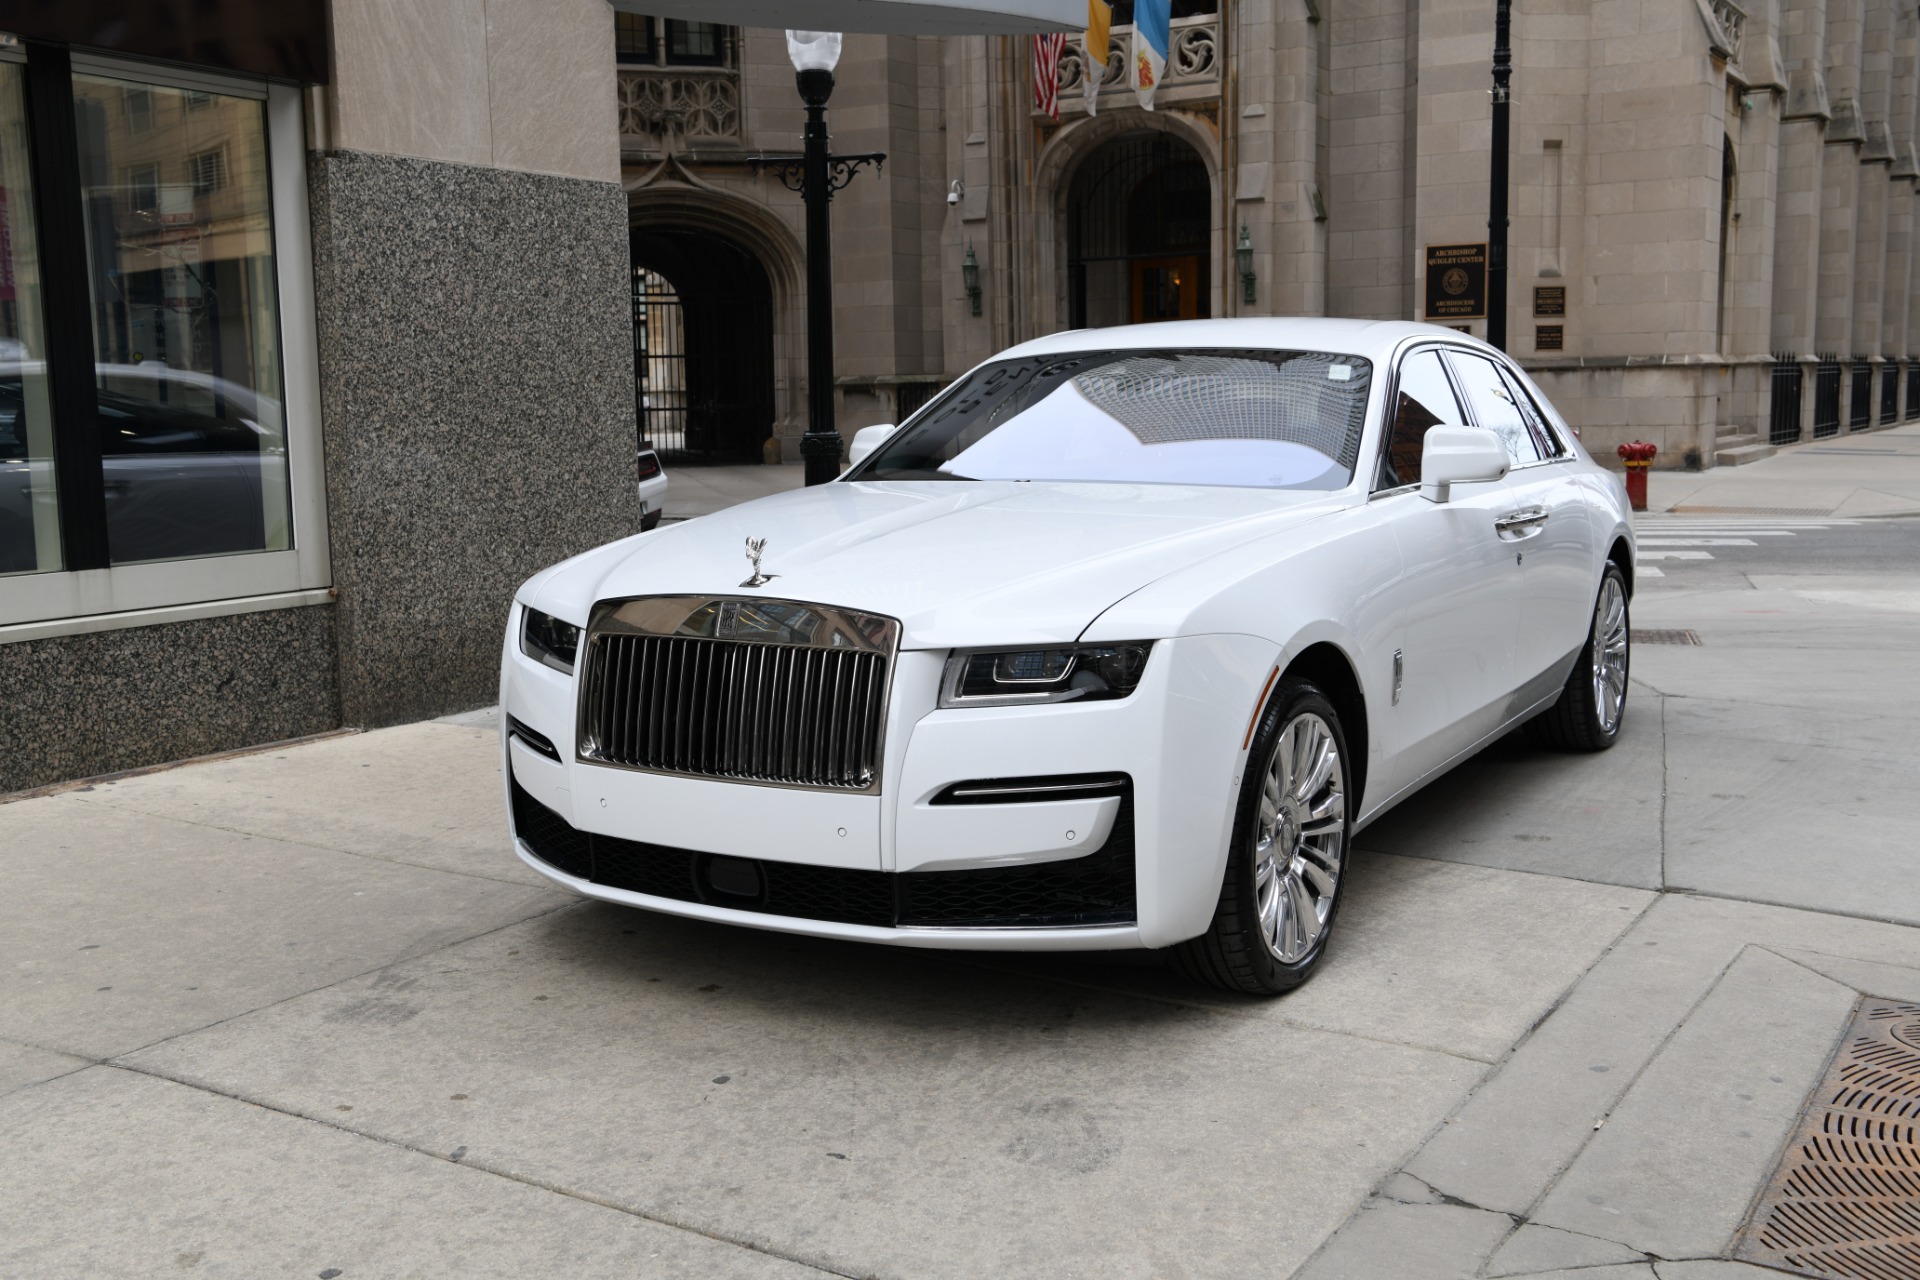 What $102,375 in extras adds to the 2021 Rolls-Royce Ghost